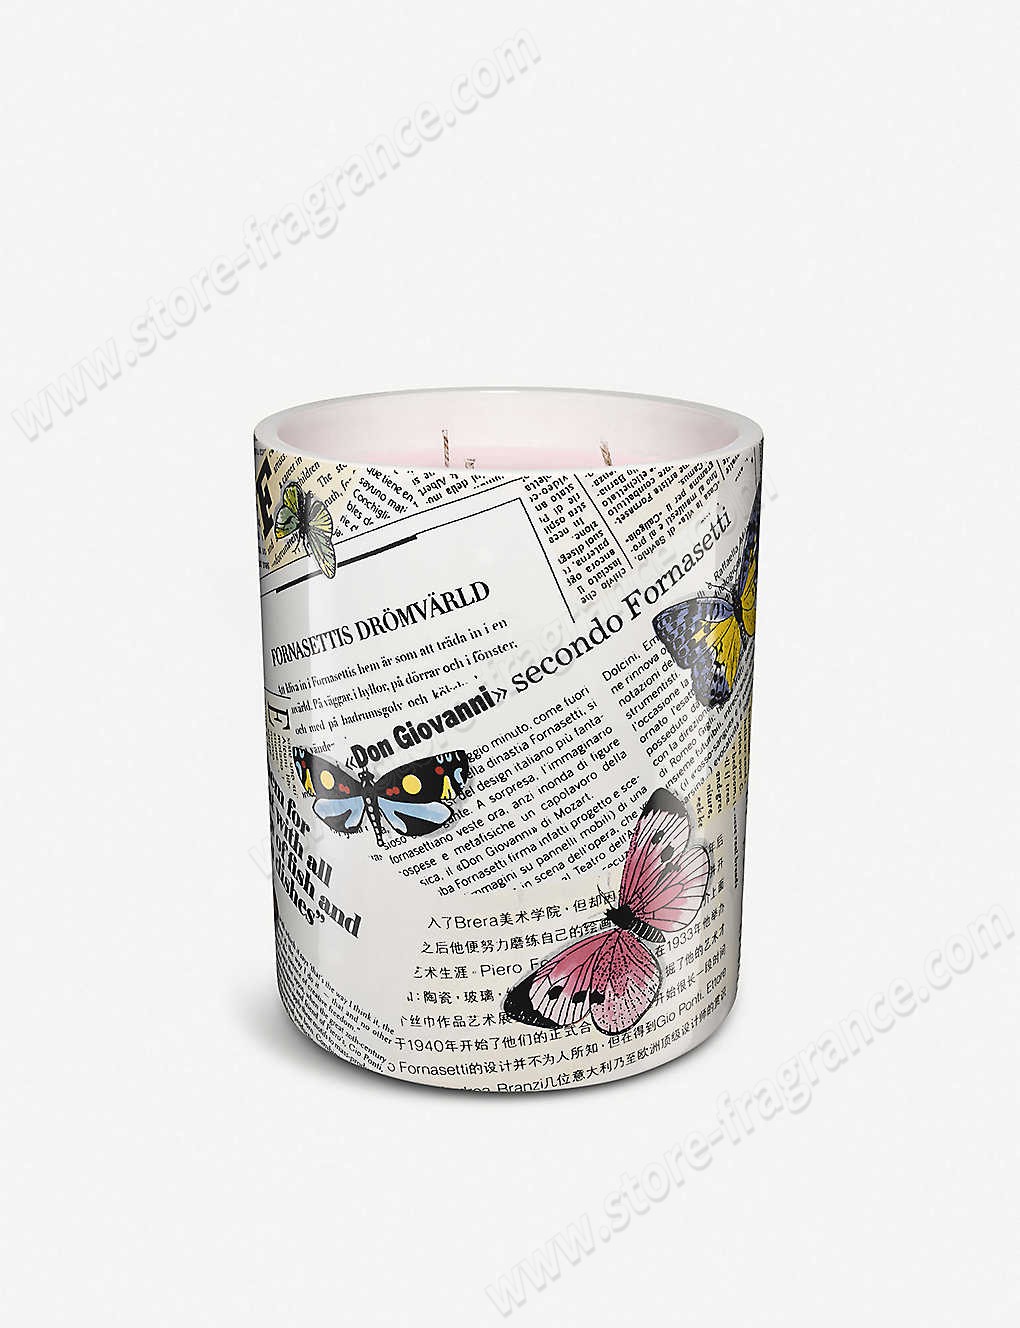 FORNASETTI/Ultime notizie scented candle 900g ✿ Discount Store - FORNASETTI/Ultime notizie scented candle 900g ✿ Discount Store